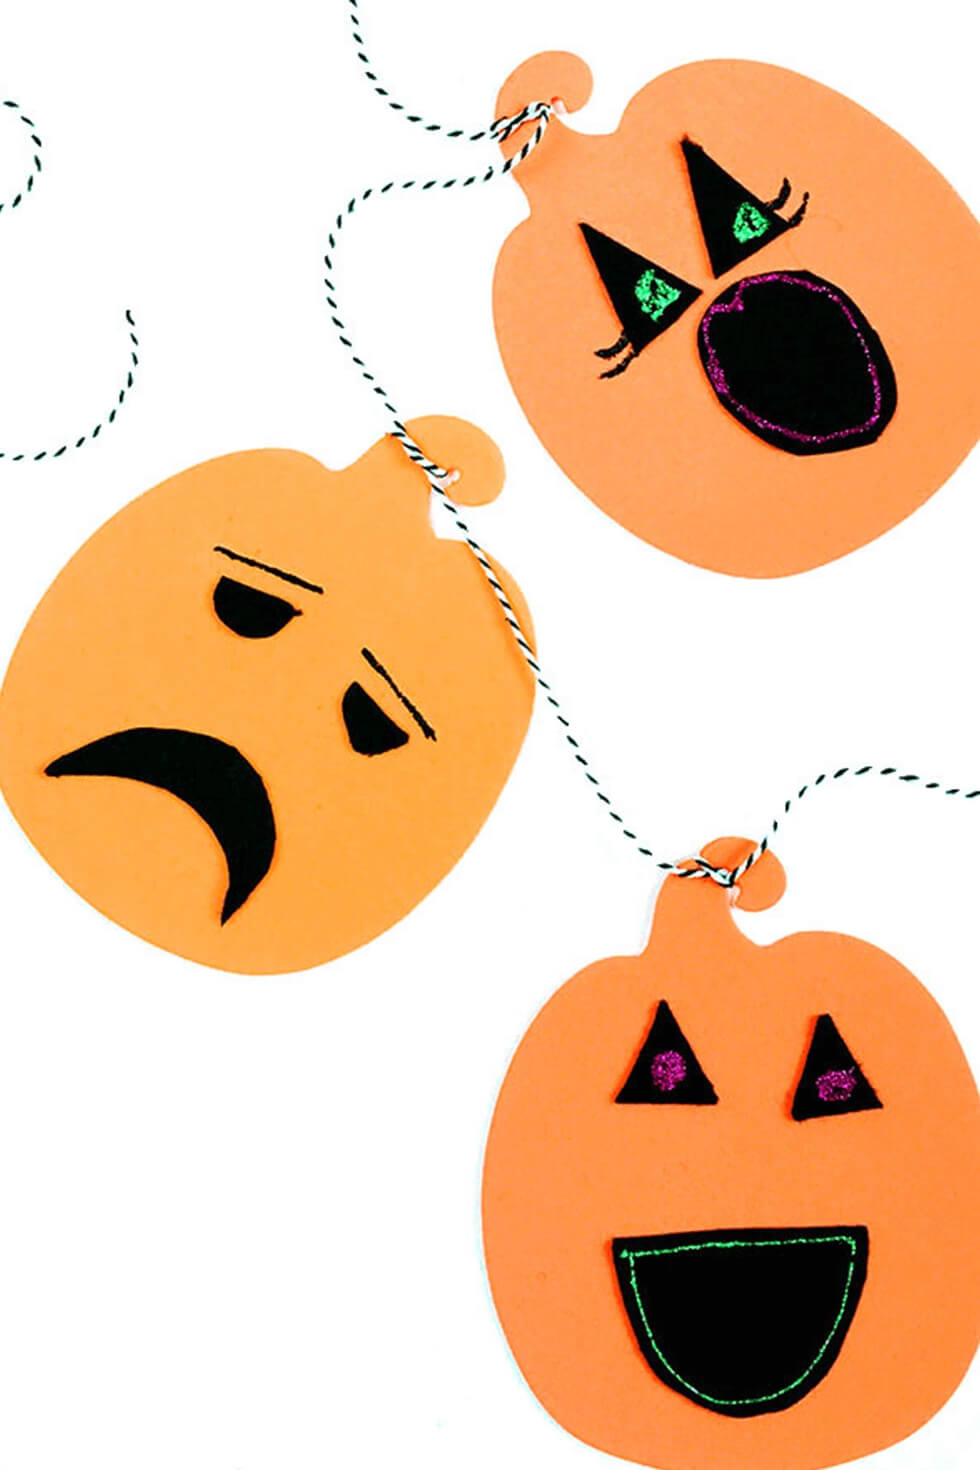 Bonding Over Creativity : Halloween Crafts To Do Together As A Family Pumpkin Wall Hanging